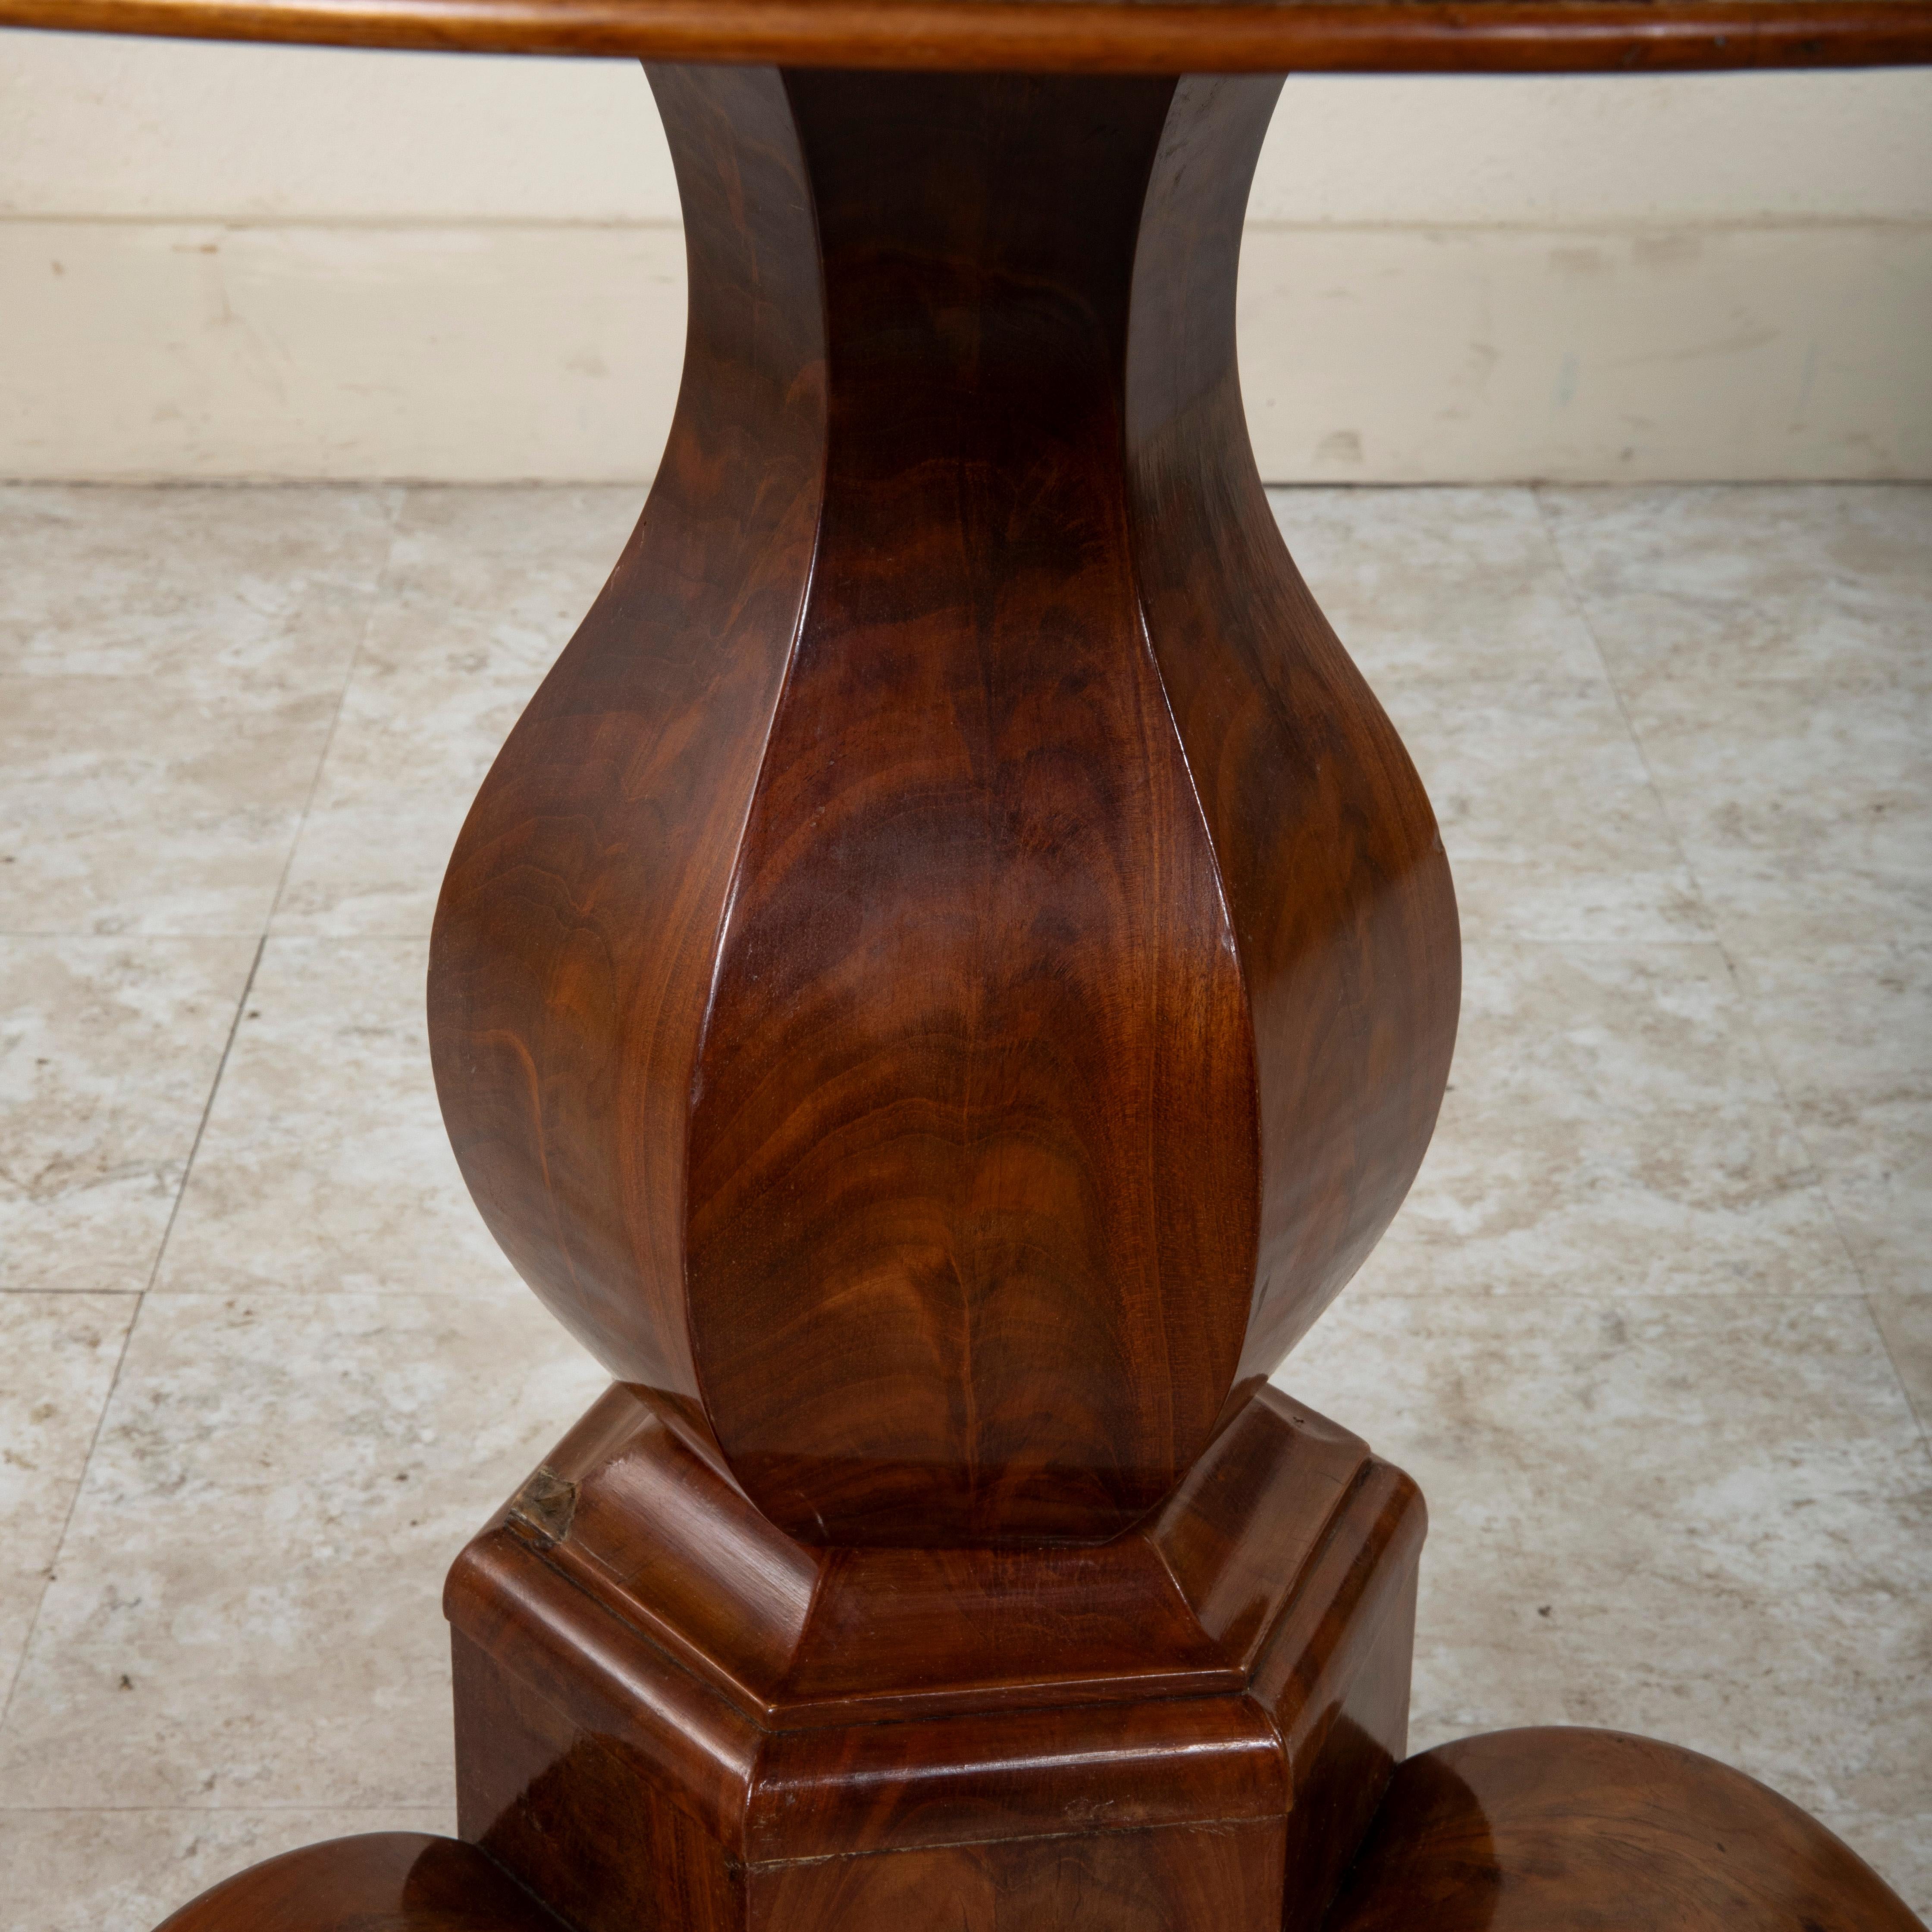 Mid-19th Century French Restauration Period Mahogany and Marble Pedestal Table For Sale 7